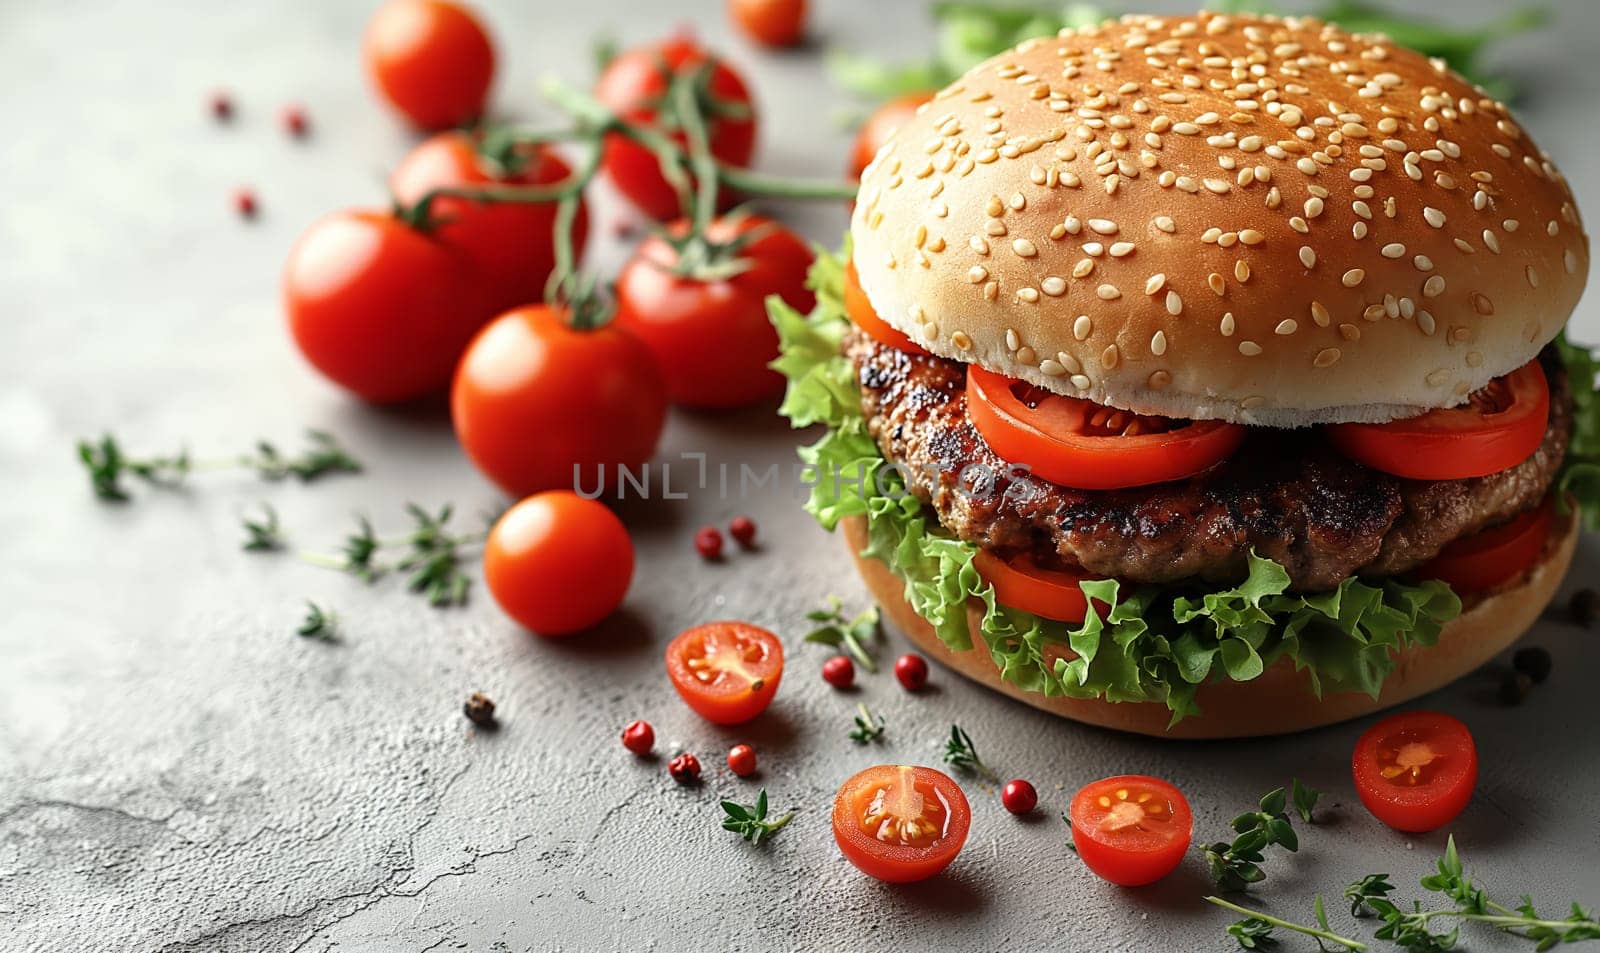 Juicy and tasty burger on a blurred background. Selective soft focus